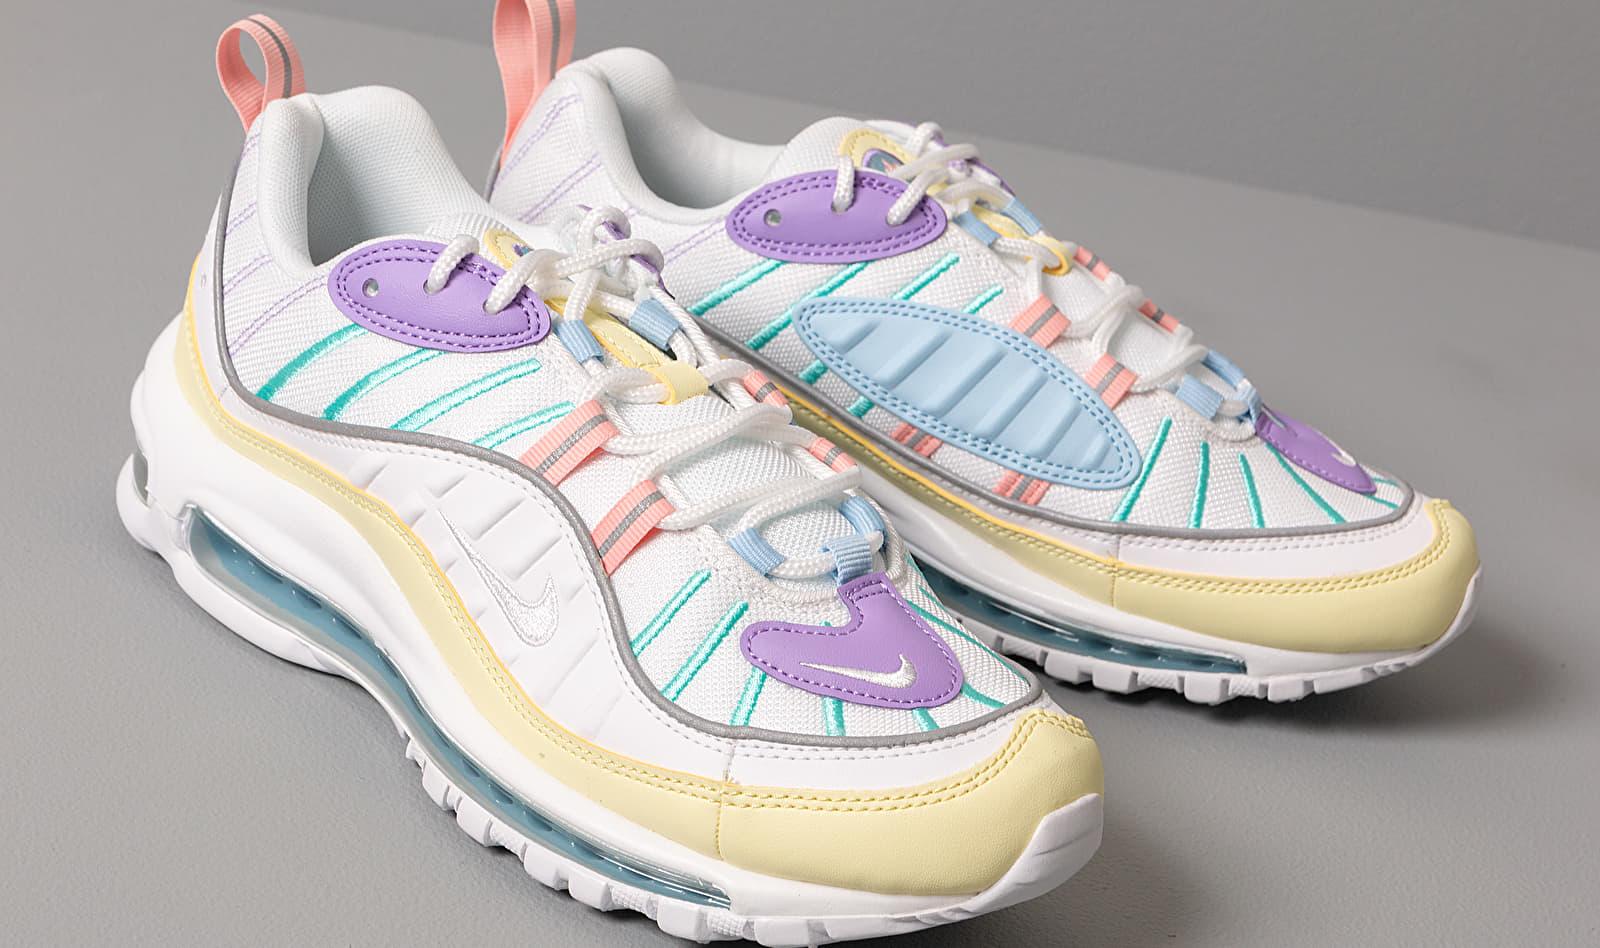 nike pastel air max 98 trainers